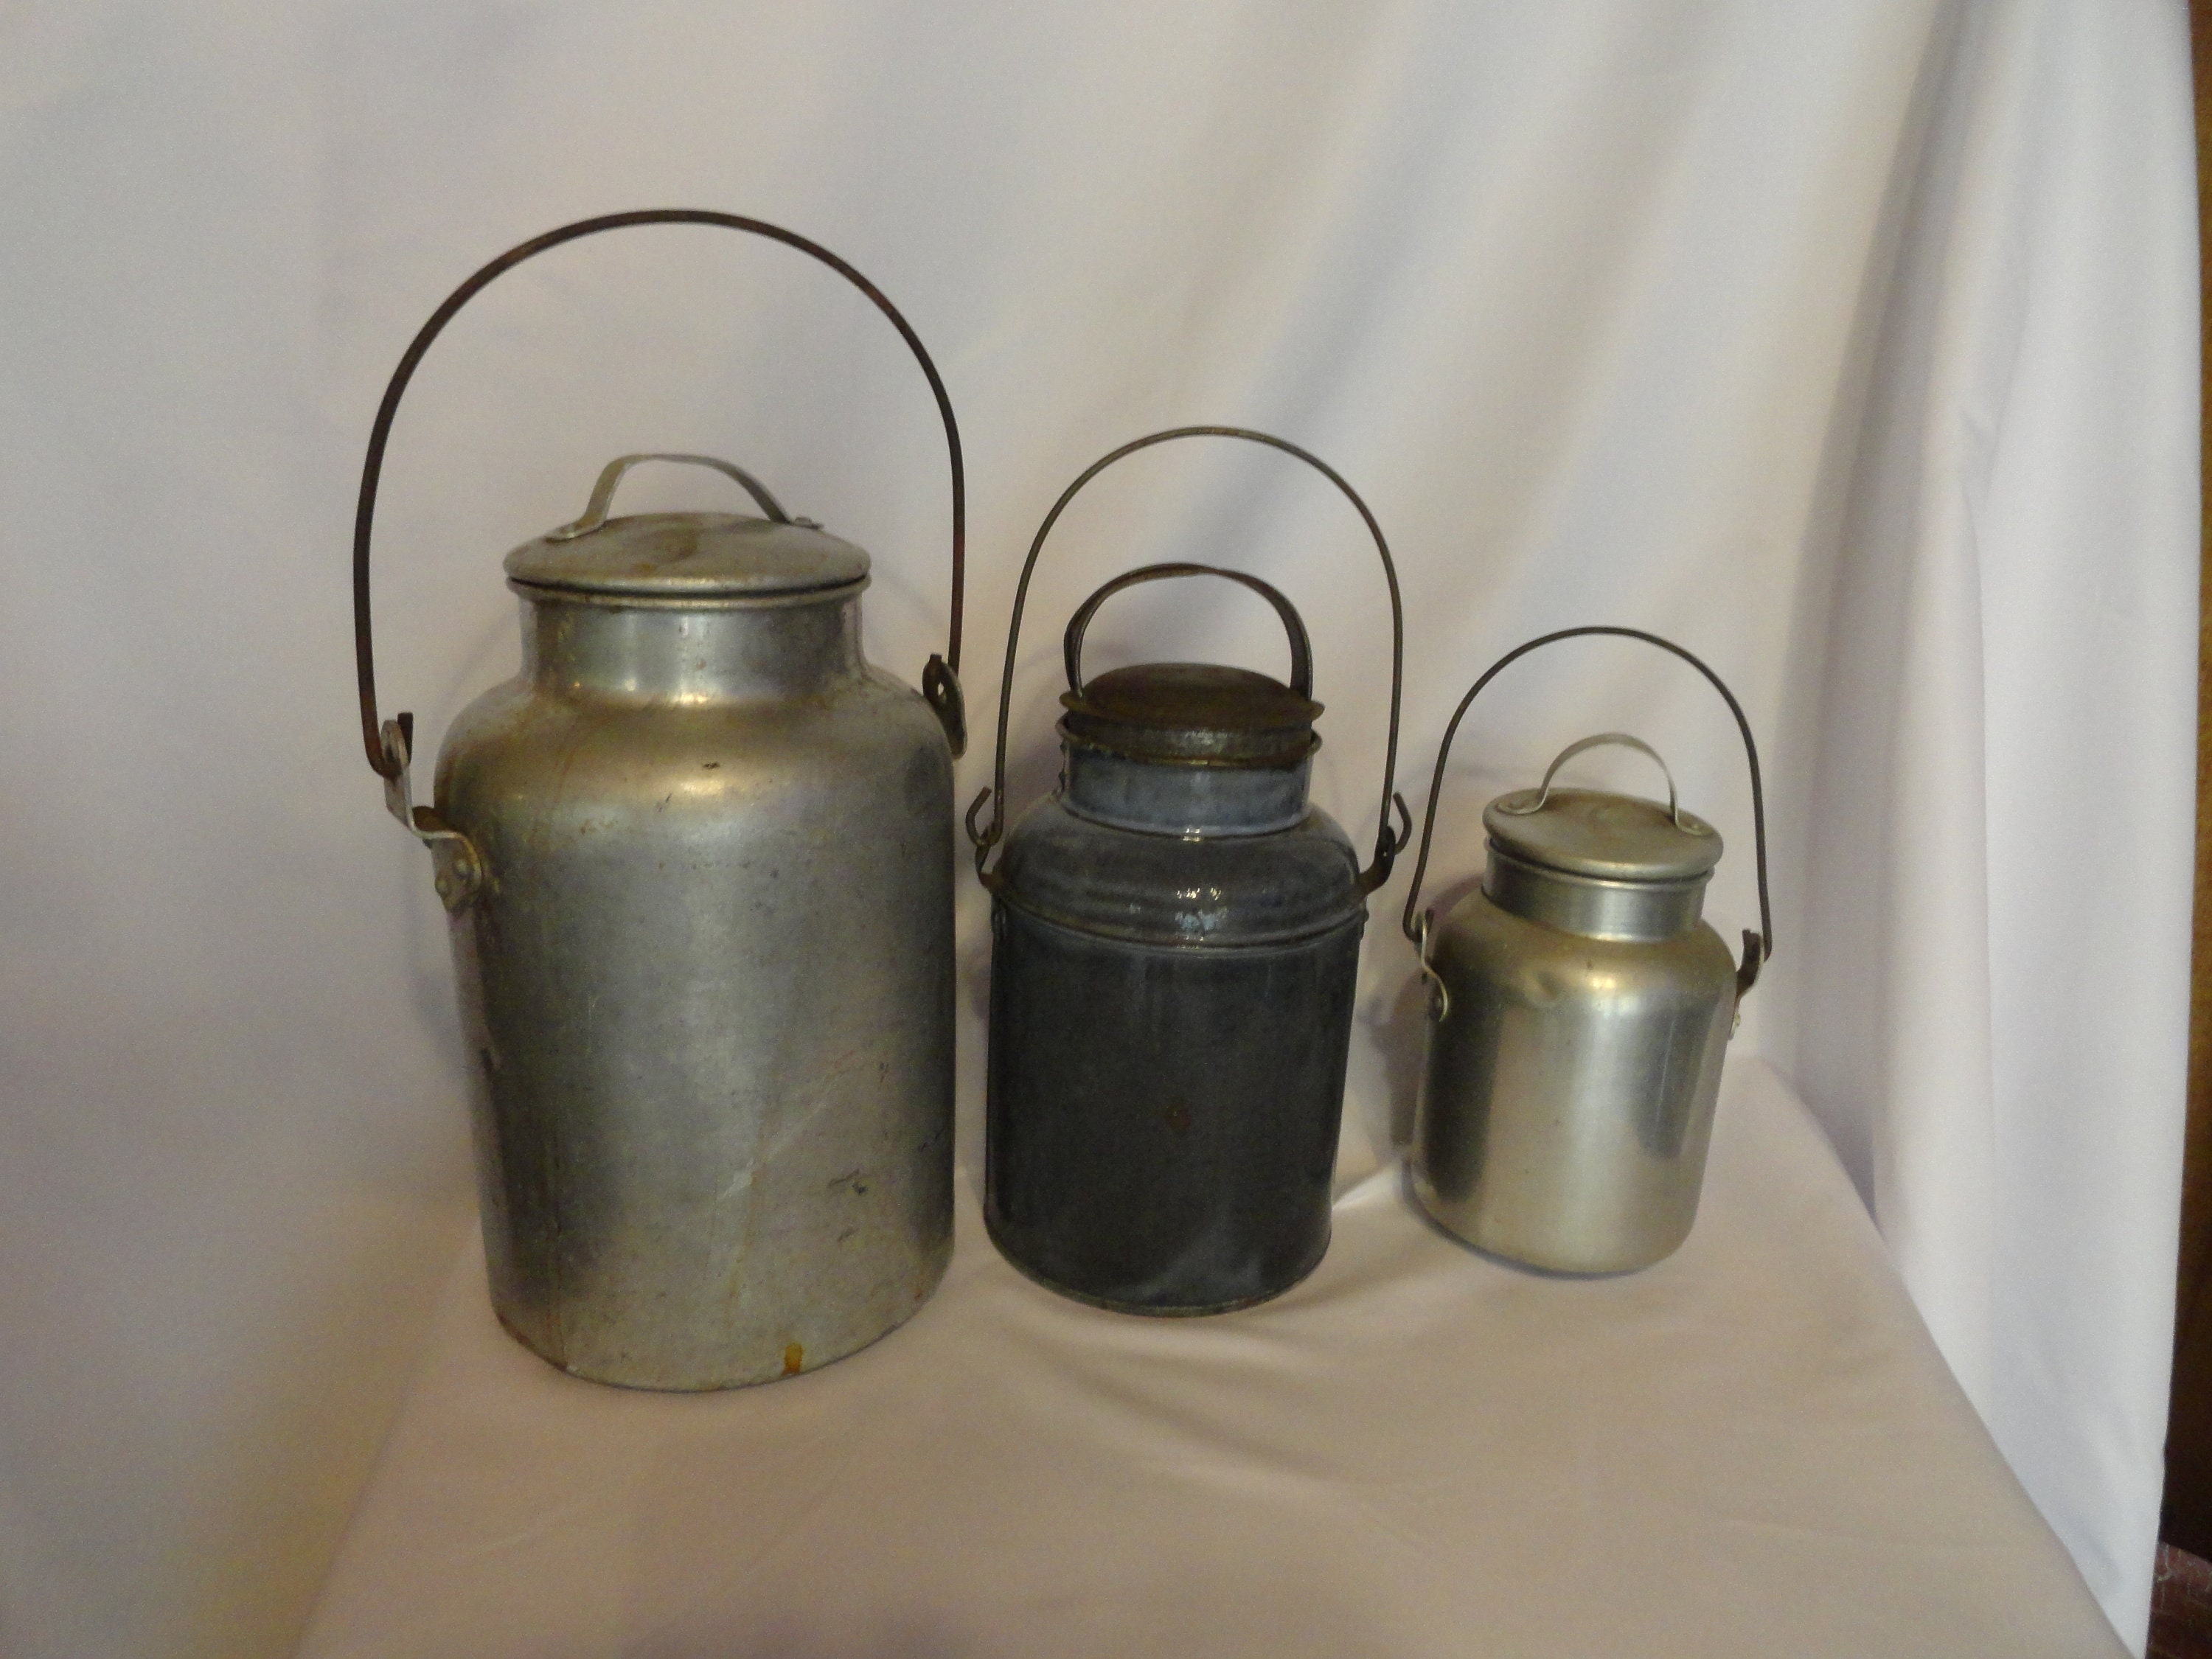 Hobby Oil Squeeze Bottles  Yankee Containers: Drums, Pails, Cans, Bottles,  Jars, Jugs and Boxes